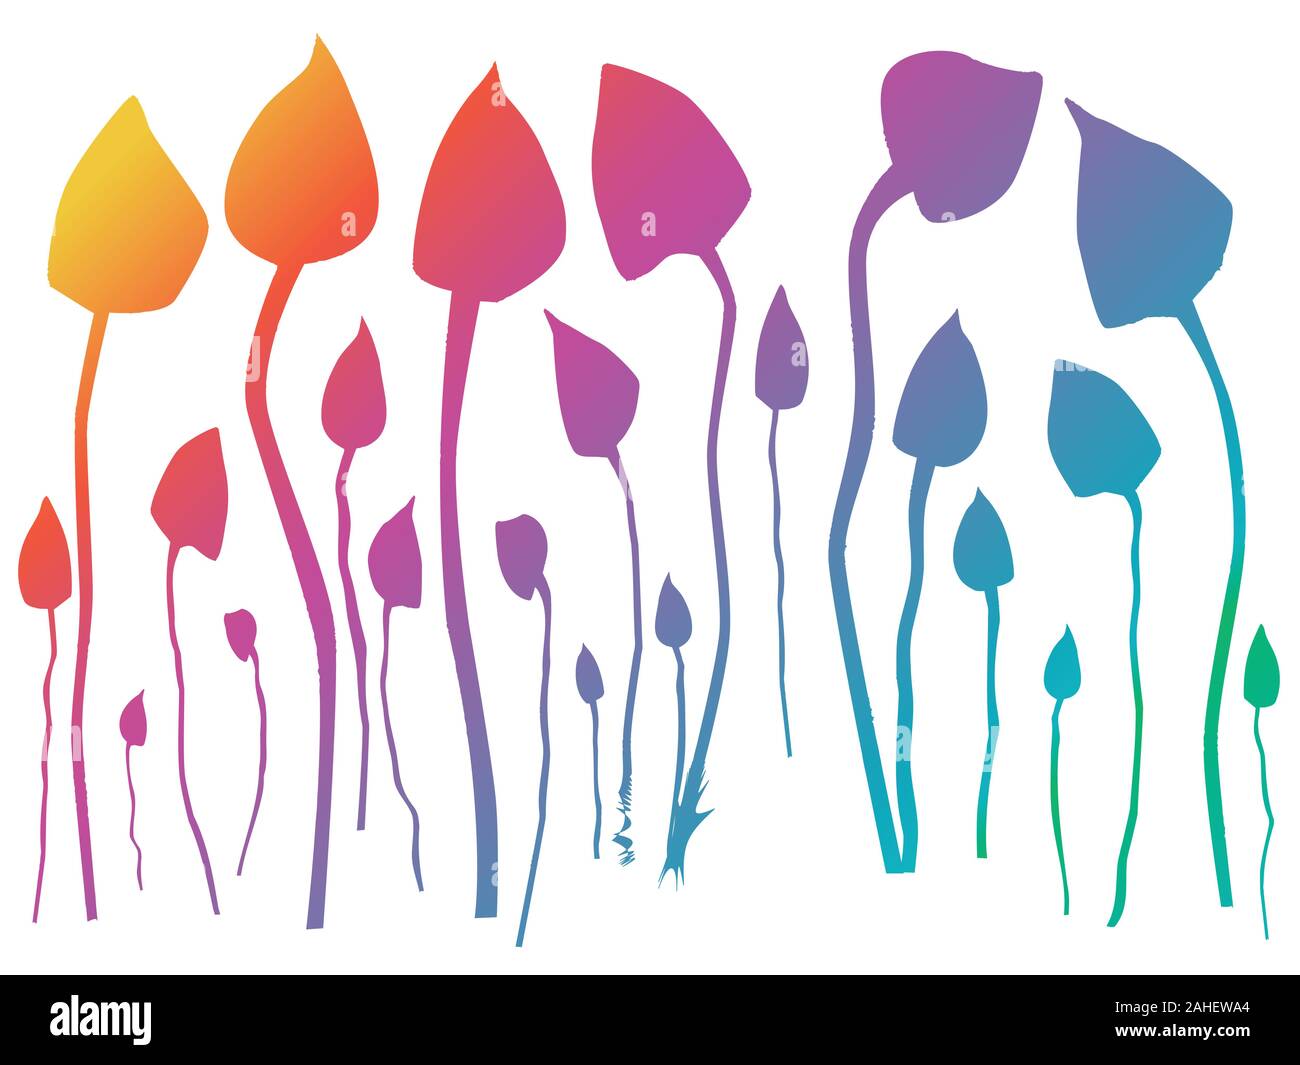 A group of mushrooms silhouetted in a rainbow against a white background Stock Vector